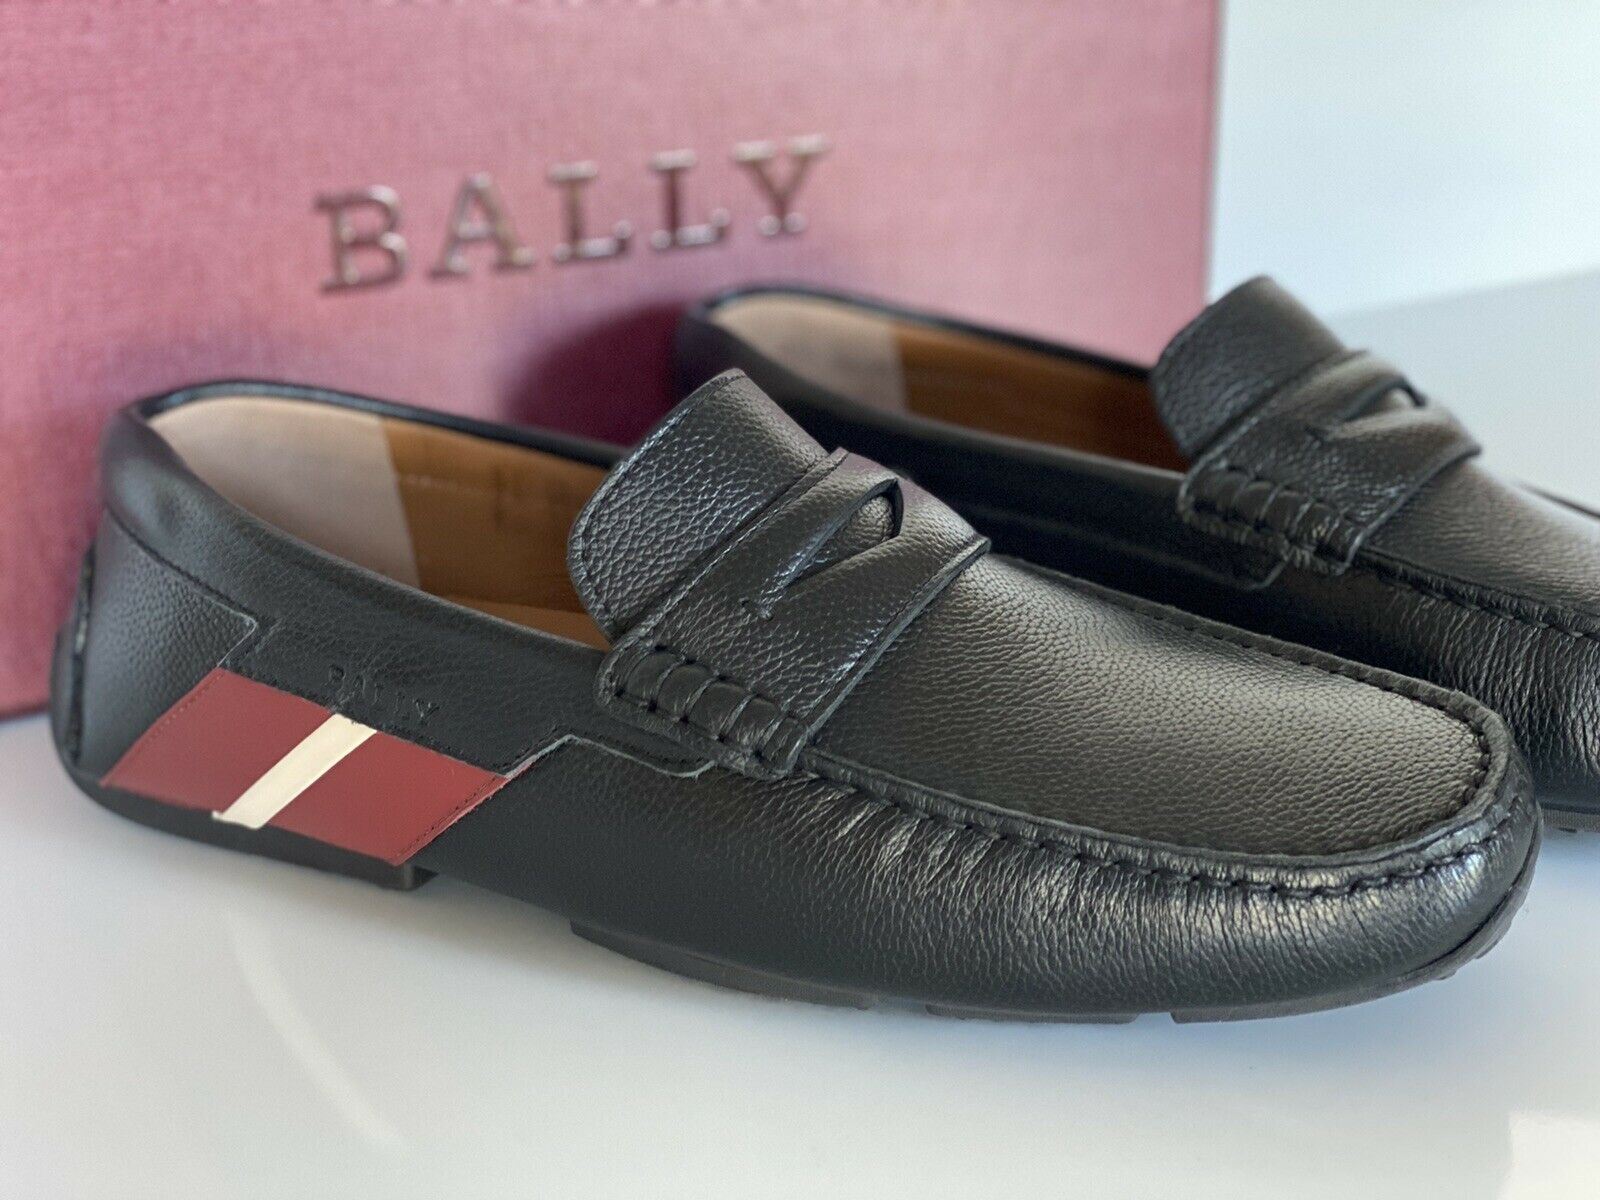 NIB Bally Mens Bovine Grained Leather Driver Loafers Shoes Black 8 US IT 6233869